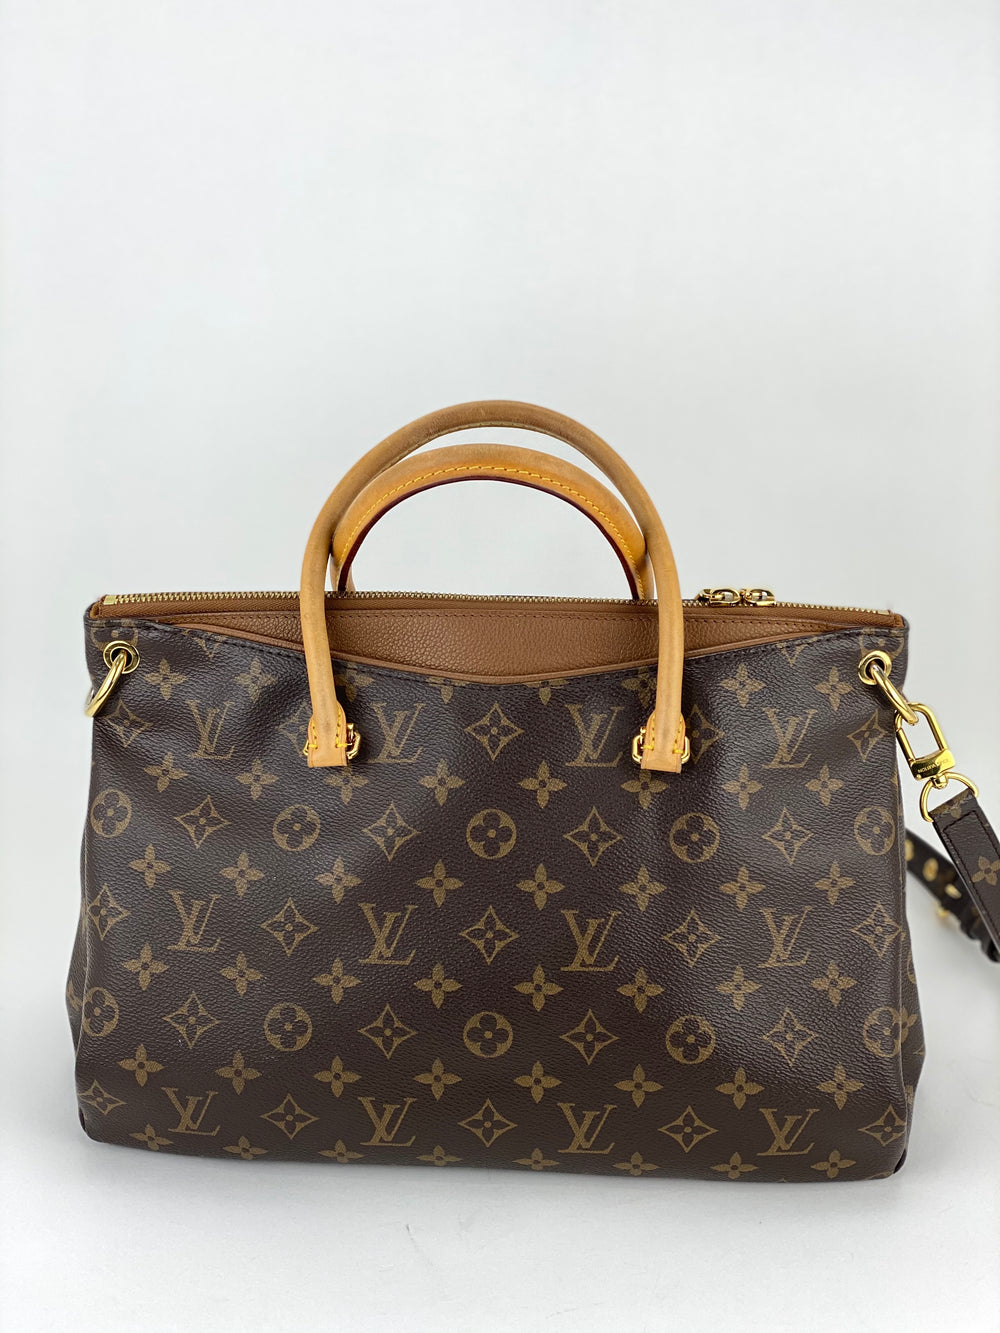 How to Tell if a Louis Vuitton Pallas Is Authentic or Fake